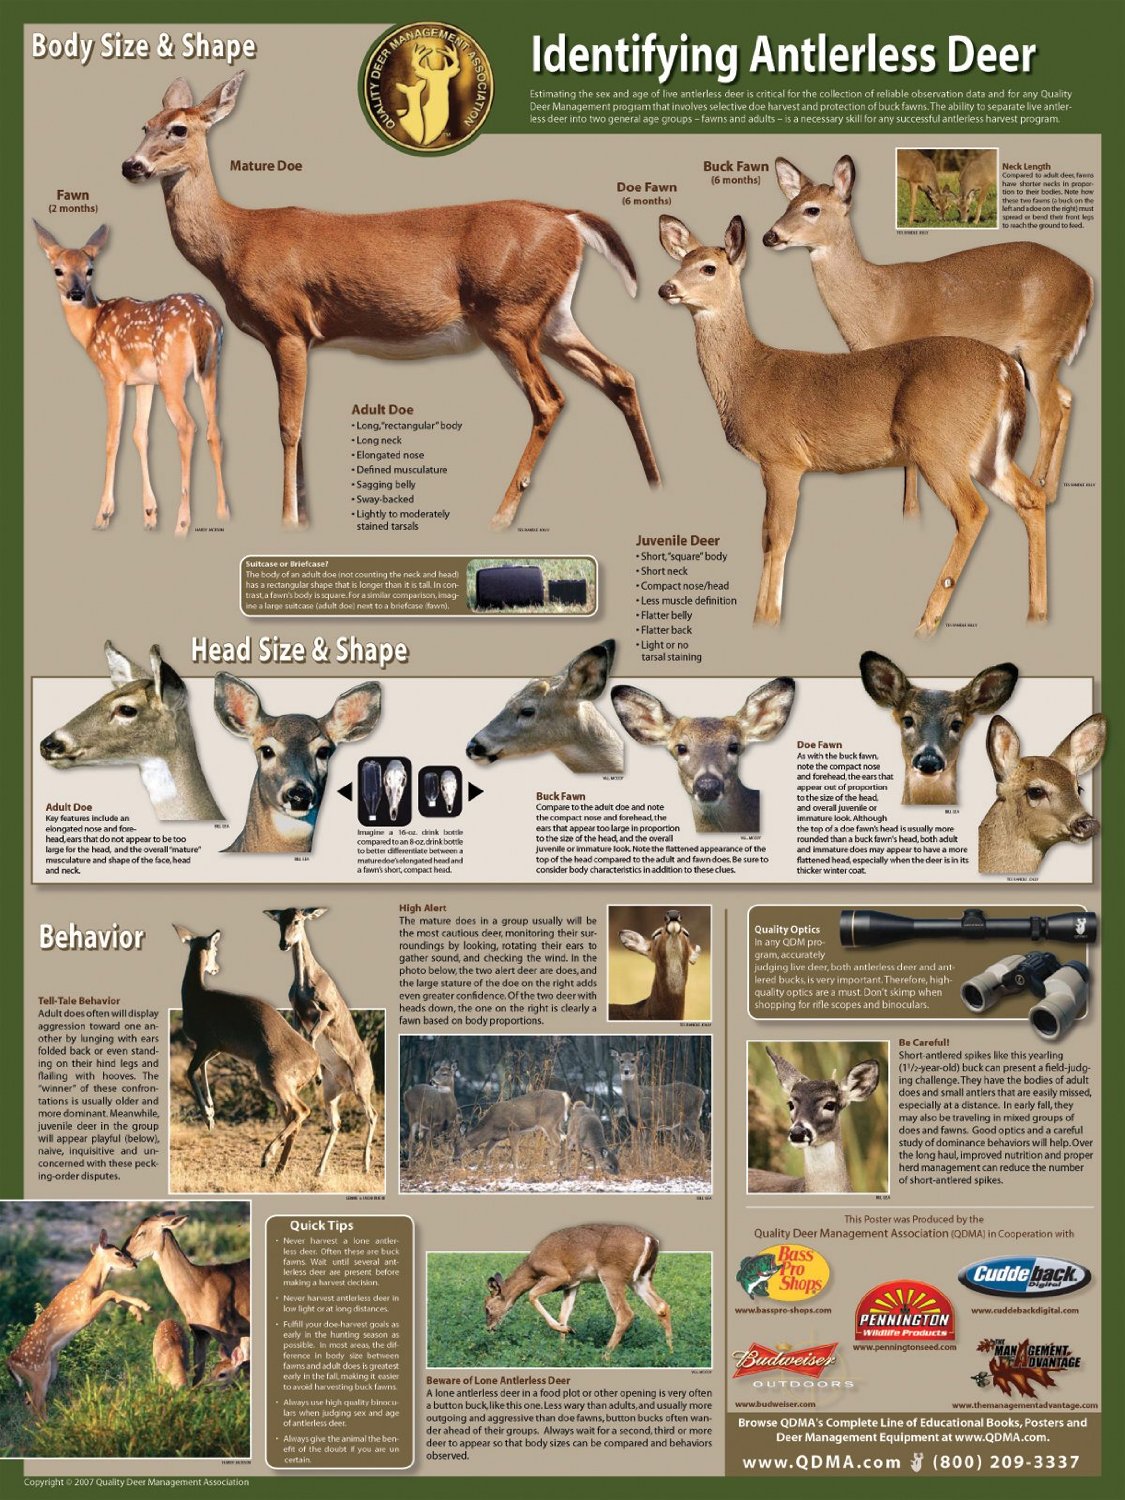 Age Antlerless Deer and Identify Mature Does for Harvest